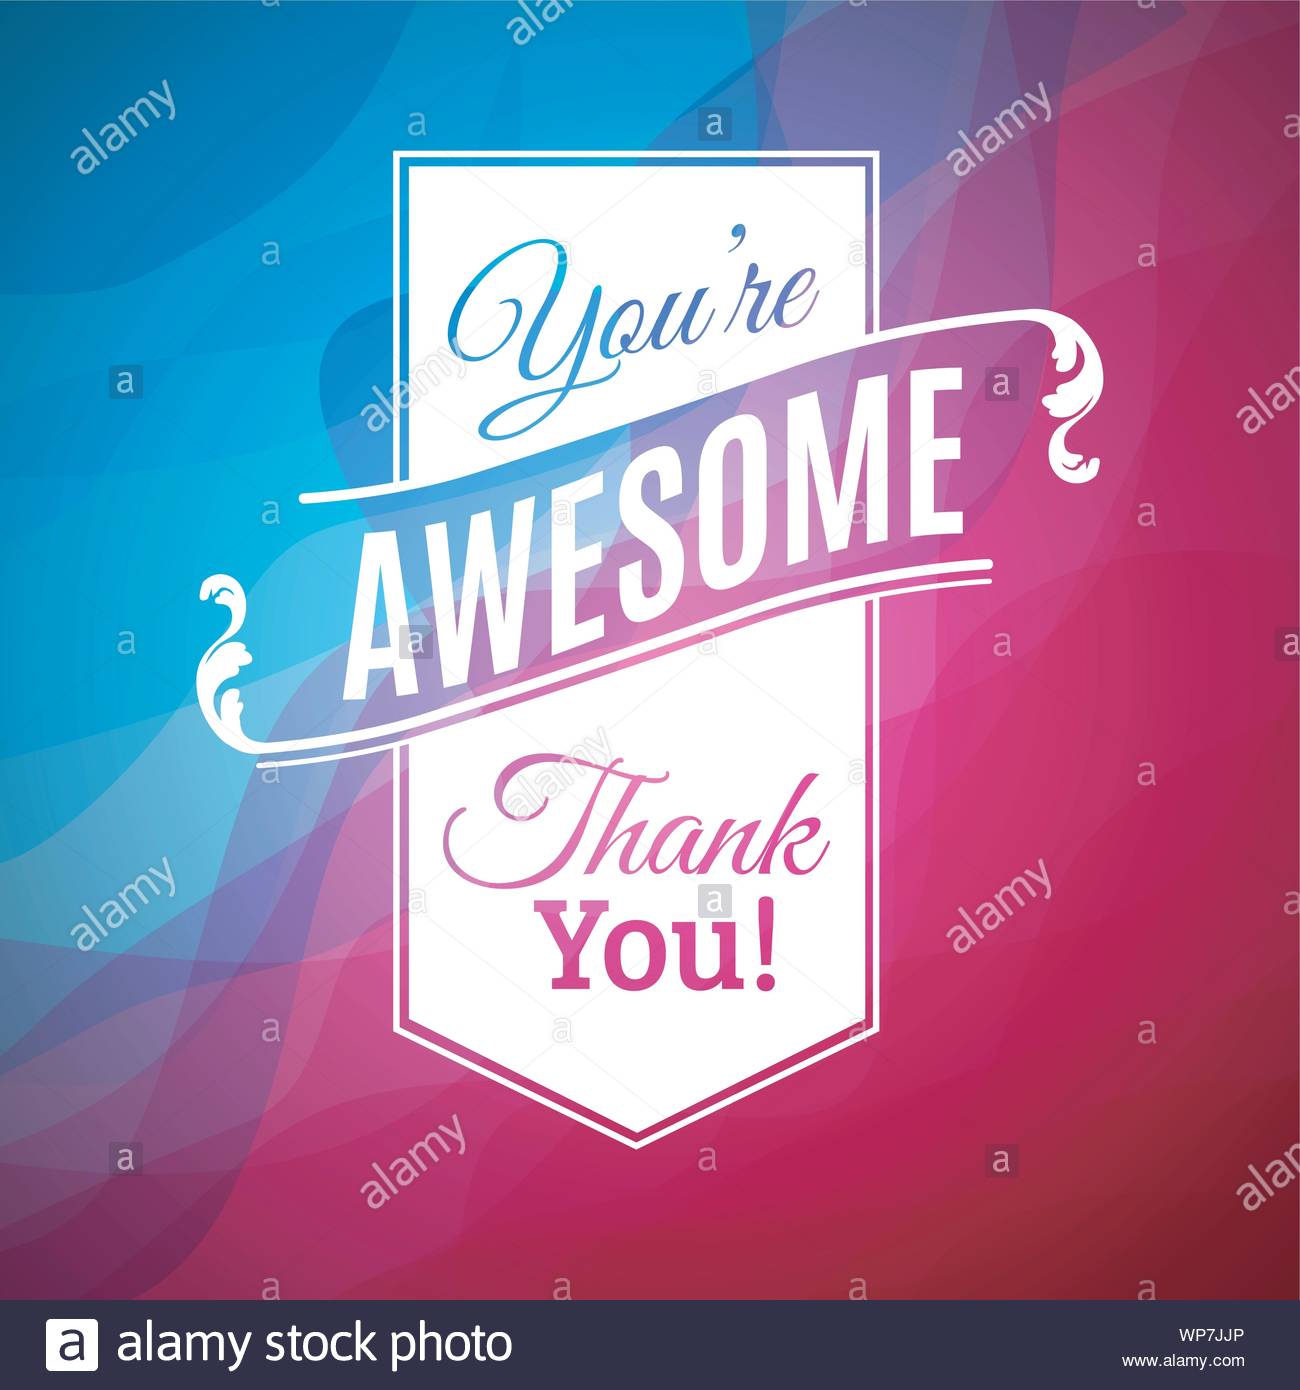 1 Teacher Thank You For Being Awesome For Helping Me Grow Inspirational Journal Notebook For Teacher With Inspirational Quotes Lined Paper By Not A Book